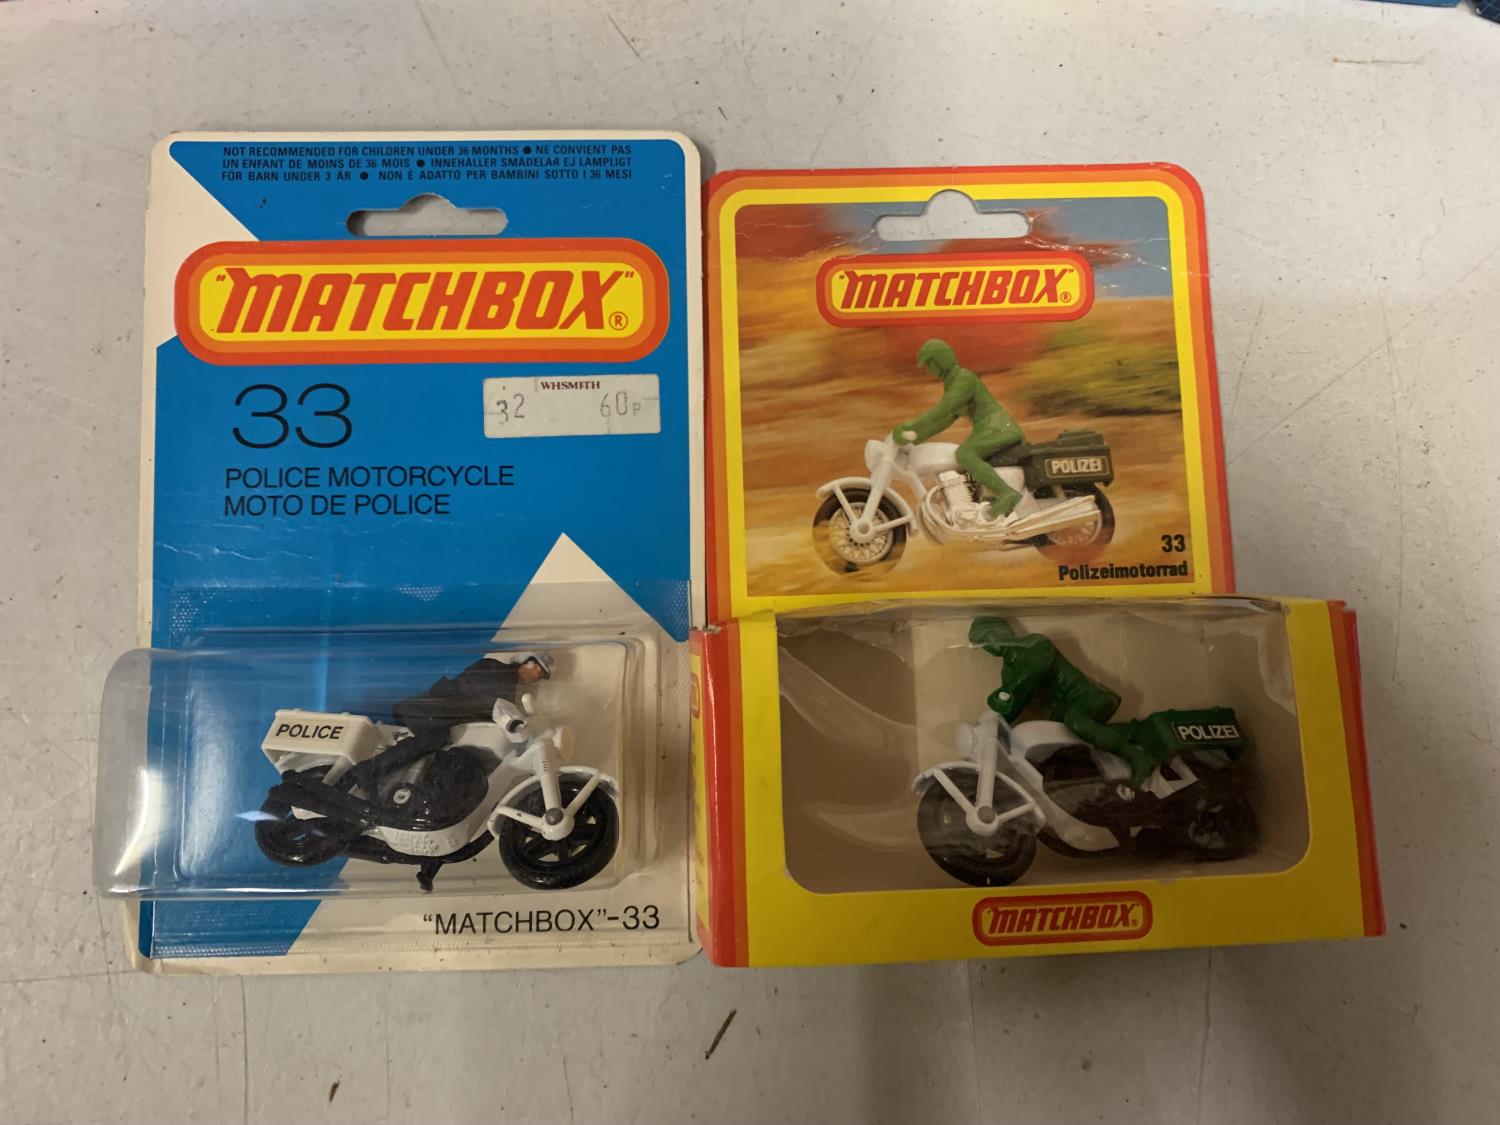 A COLLECTION OF BOXED AND UNBOXED MATCHBOX VEHICLES - ALL MODEL NUMBER 33 OF VARIOUS ERAS AND - Image 3 of 6